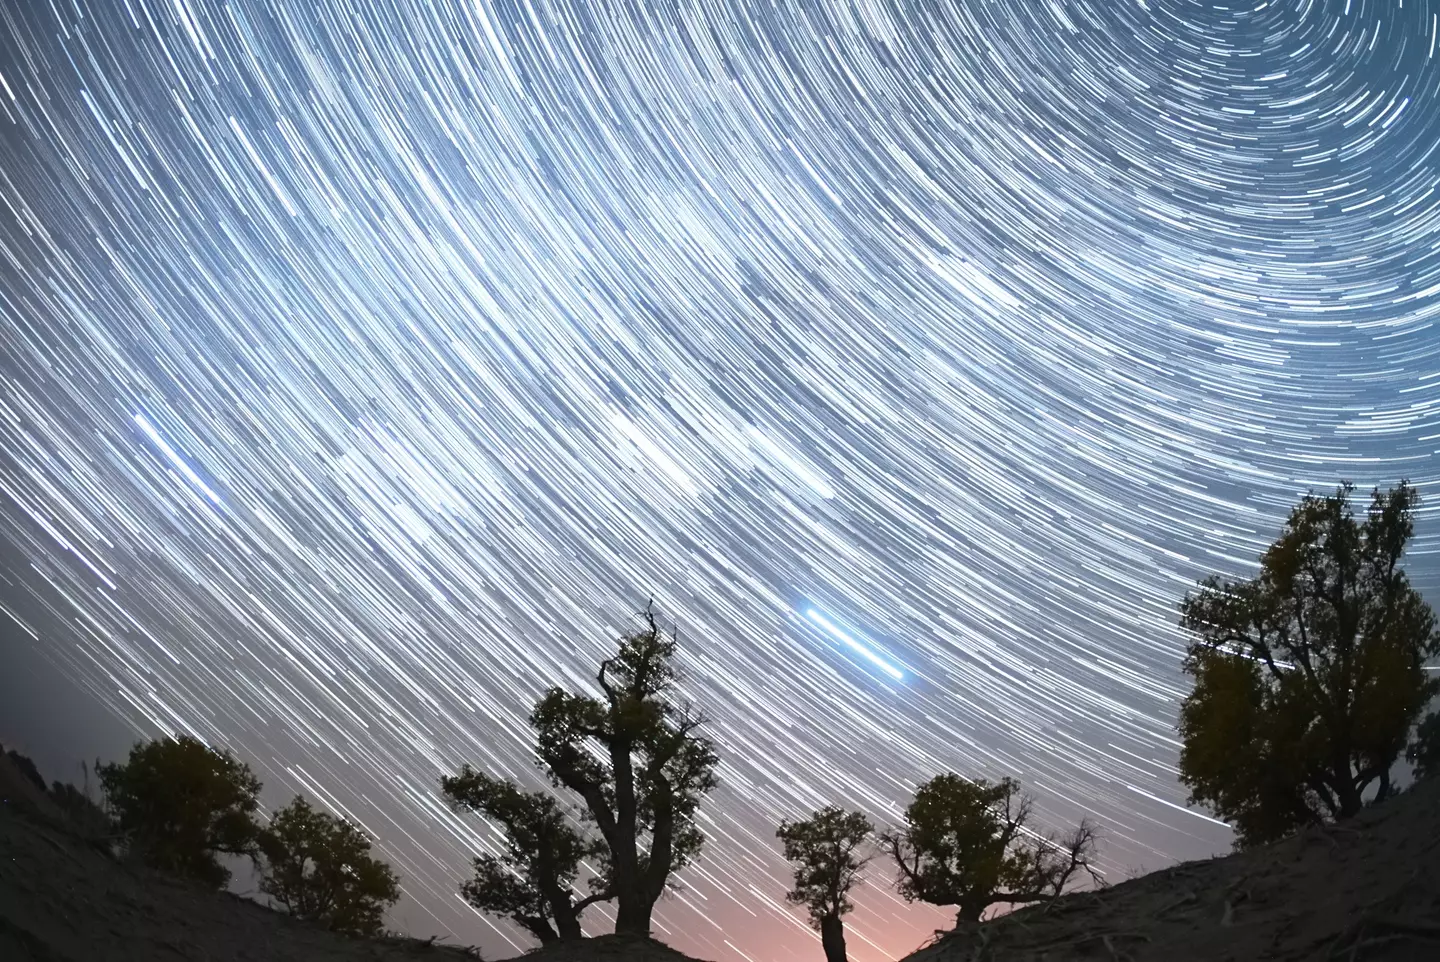 The Orionid Meteor Shower took place last month, did that have anything to do with it?